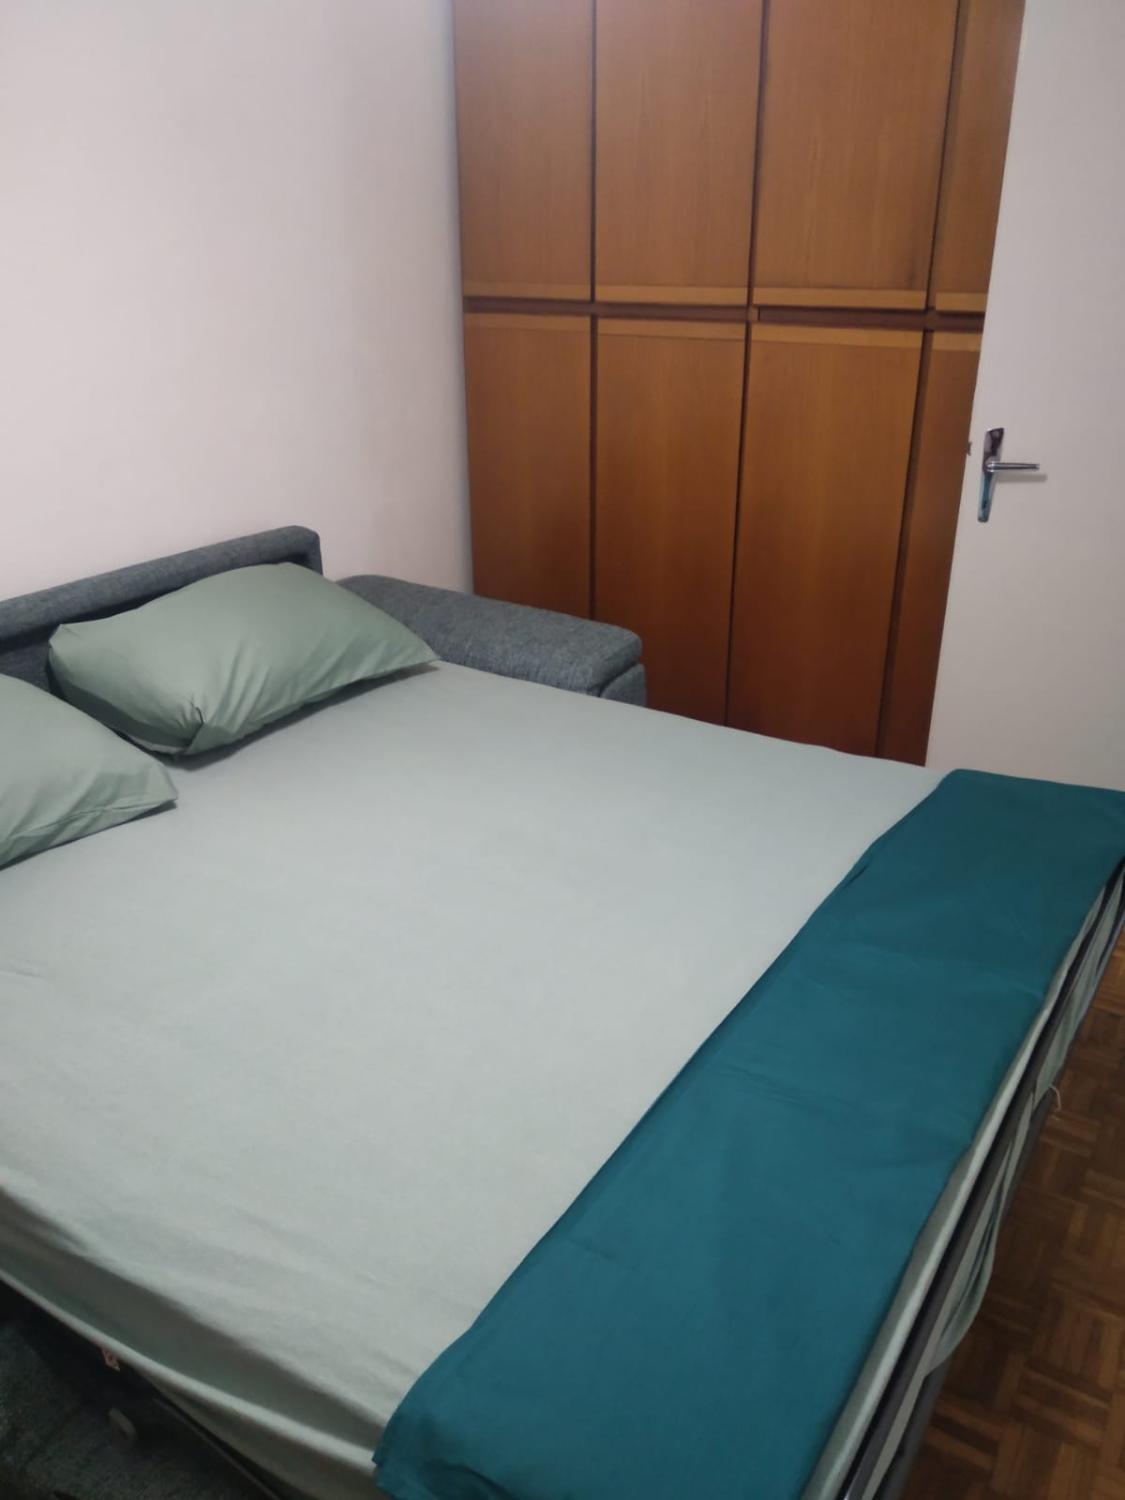 Mini apartment close to everything you will need, Udine